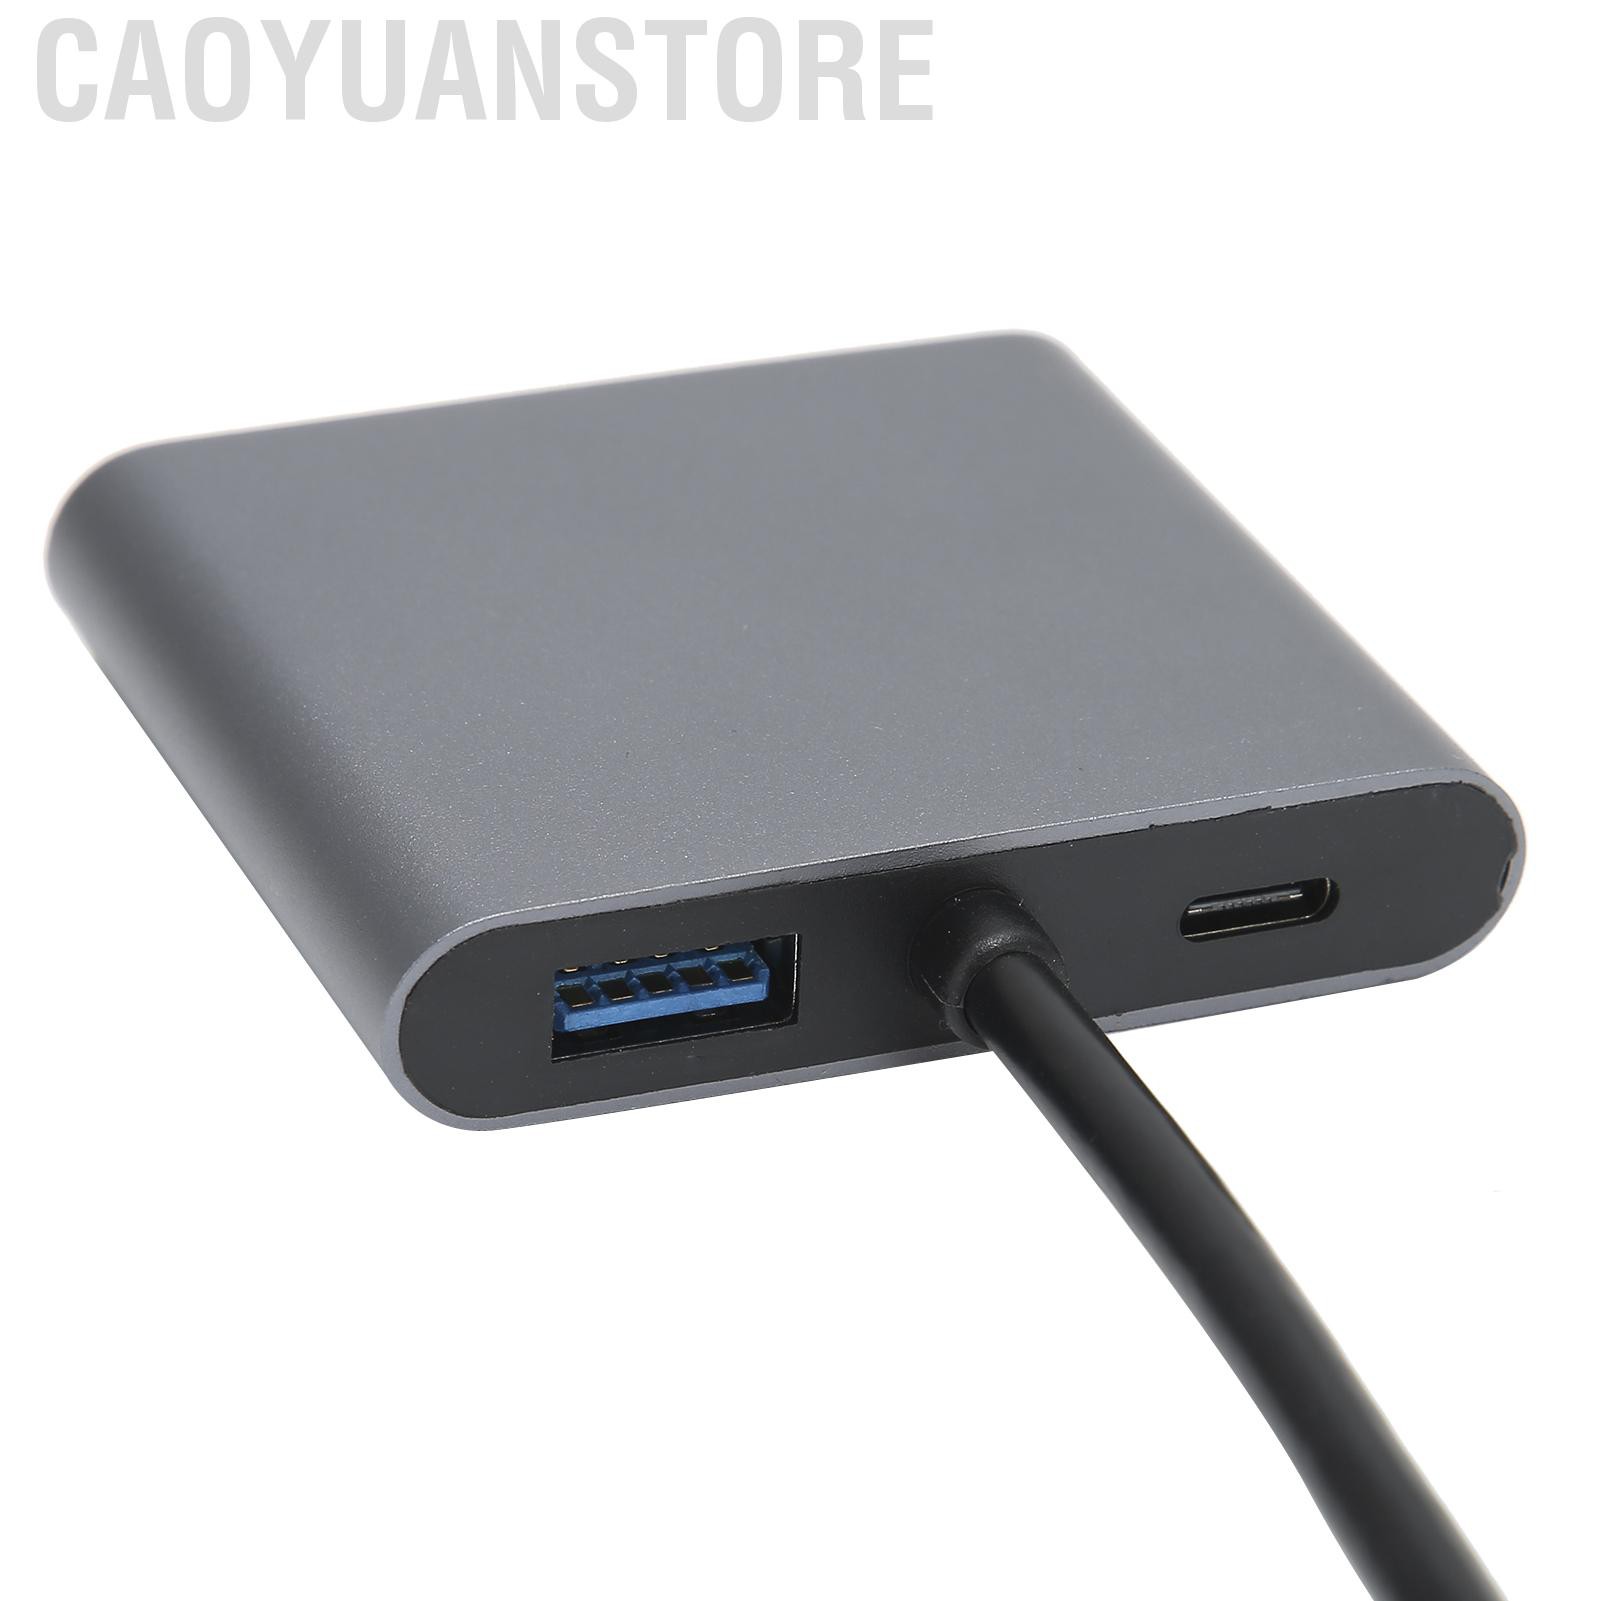 Caoyuanstore 4in 1 Type C to PD/USB 3.0/ Dual HDMI‑Compatible Adapter Converter Hub for Laptop